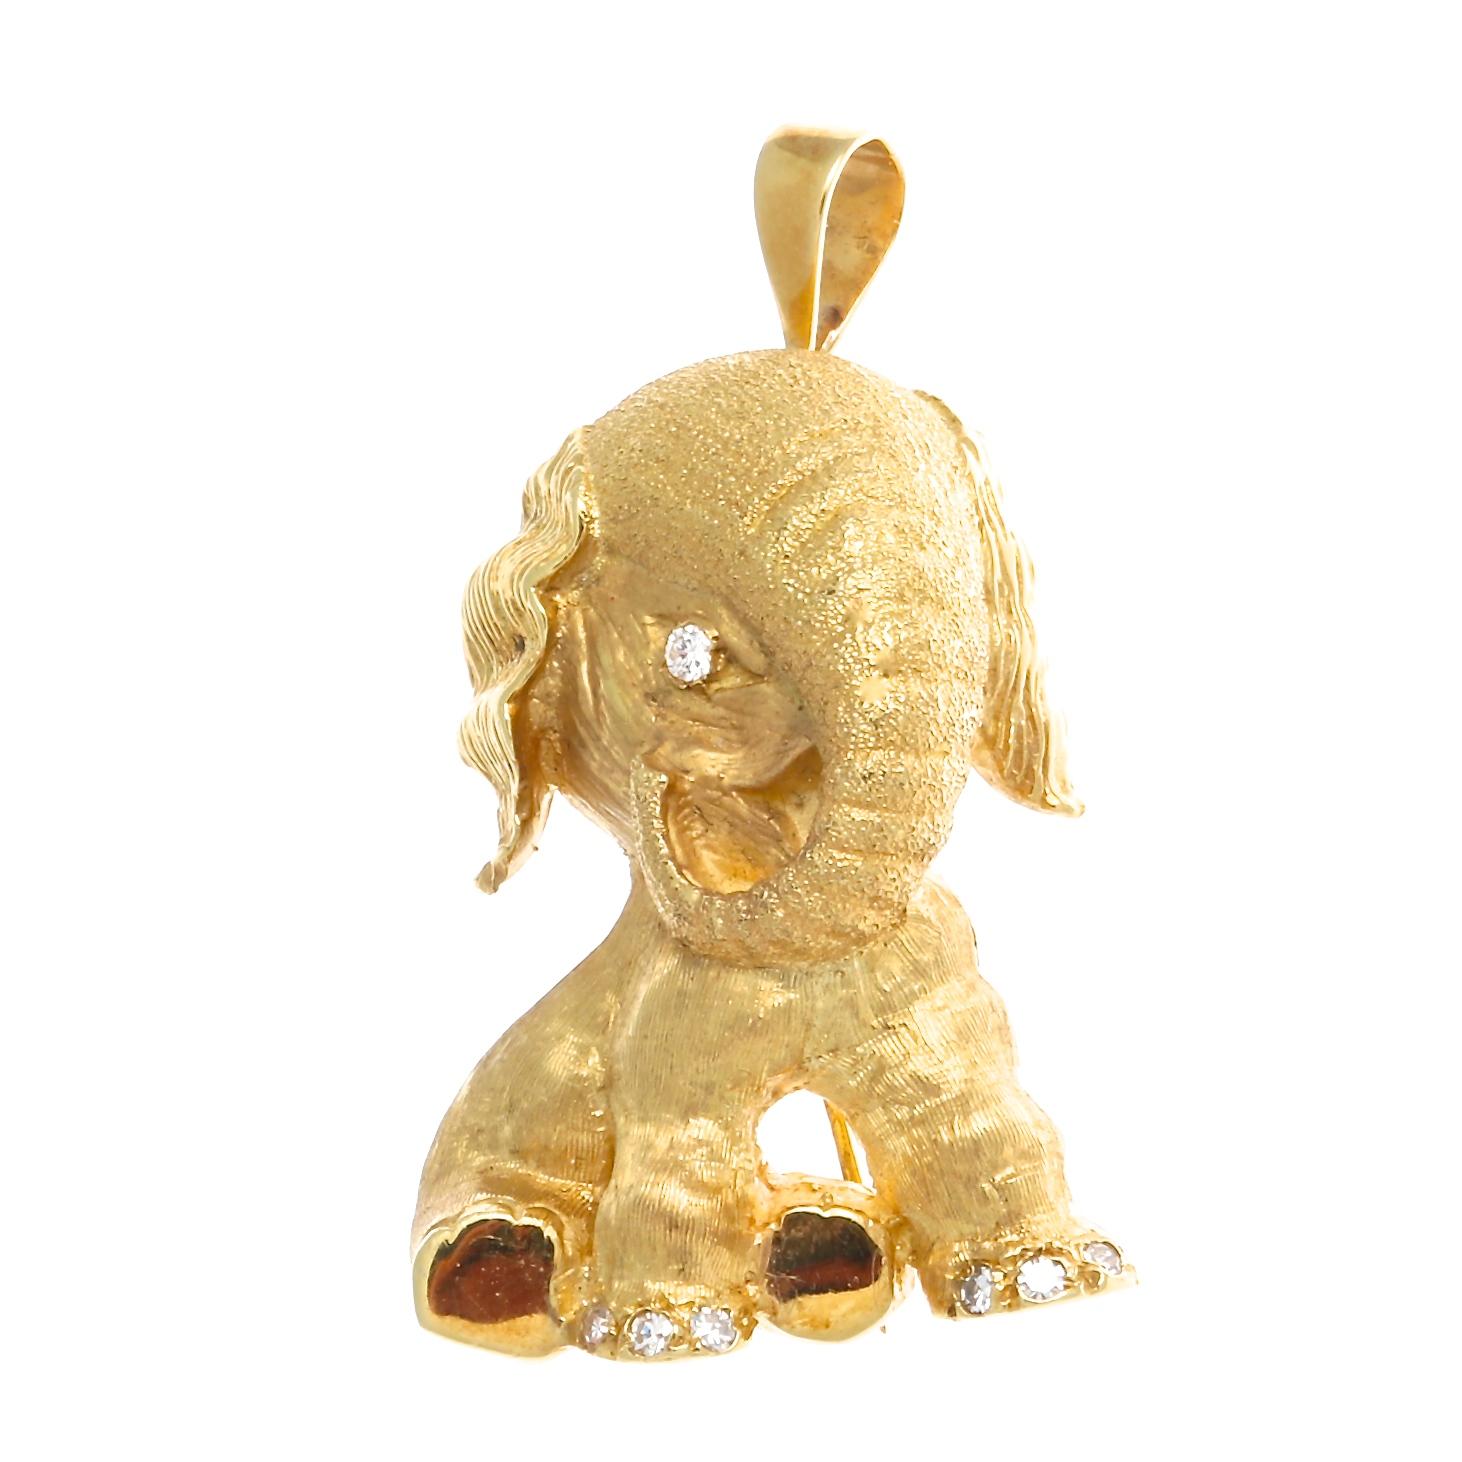 The Tiffany elephant symbol of good luck, strength and honor. Textured 18k gold and perfectly placed diamonds bring this motif to life. Signed Tiffany & Co. 1-1/2 inches long x 1-3/16 inches wider.